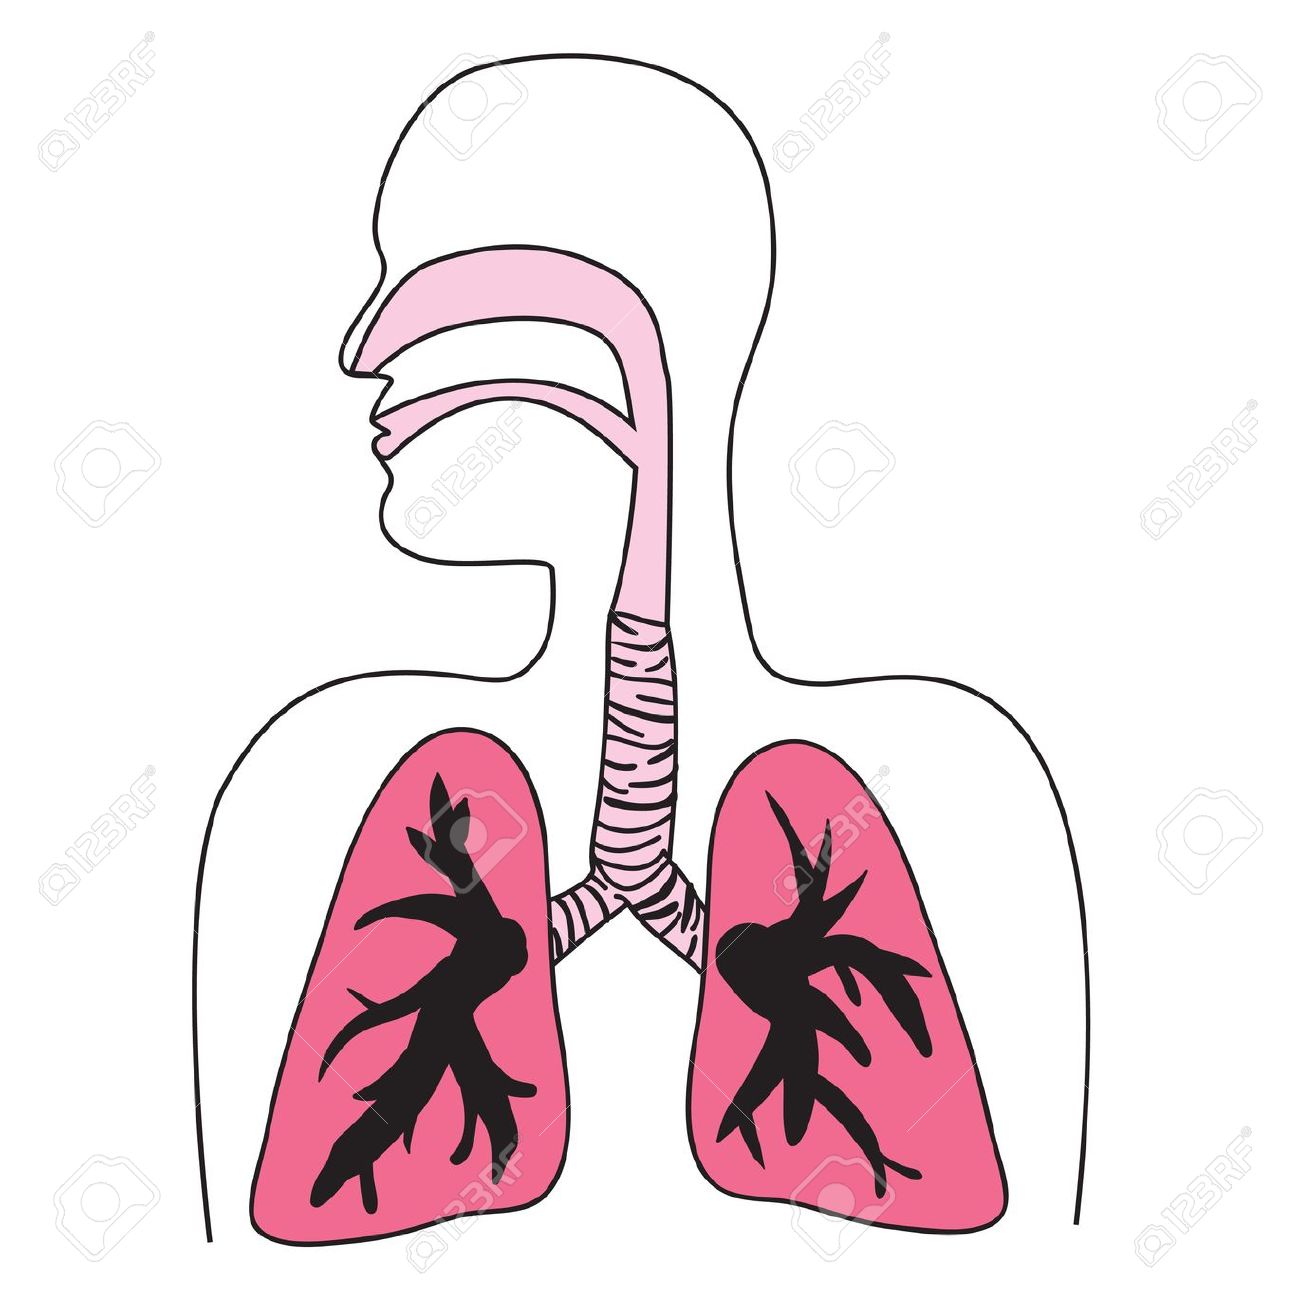 Drawing of the human respiratory system Stock Vector - 7054546